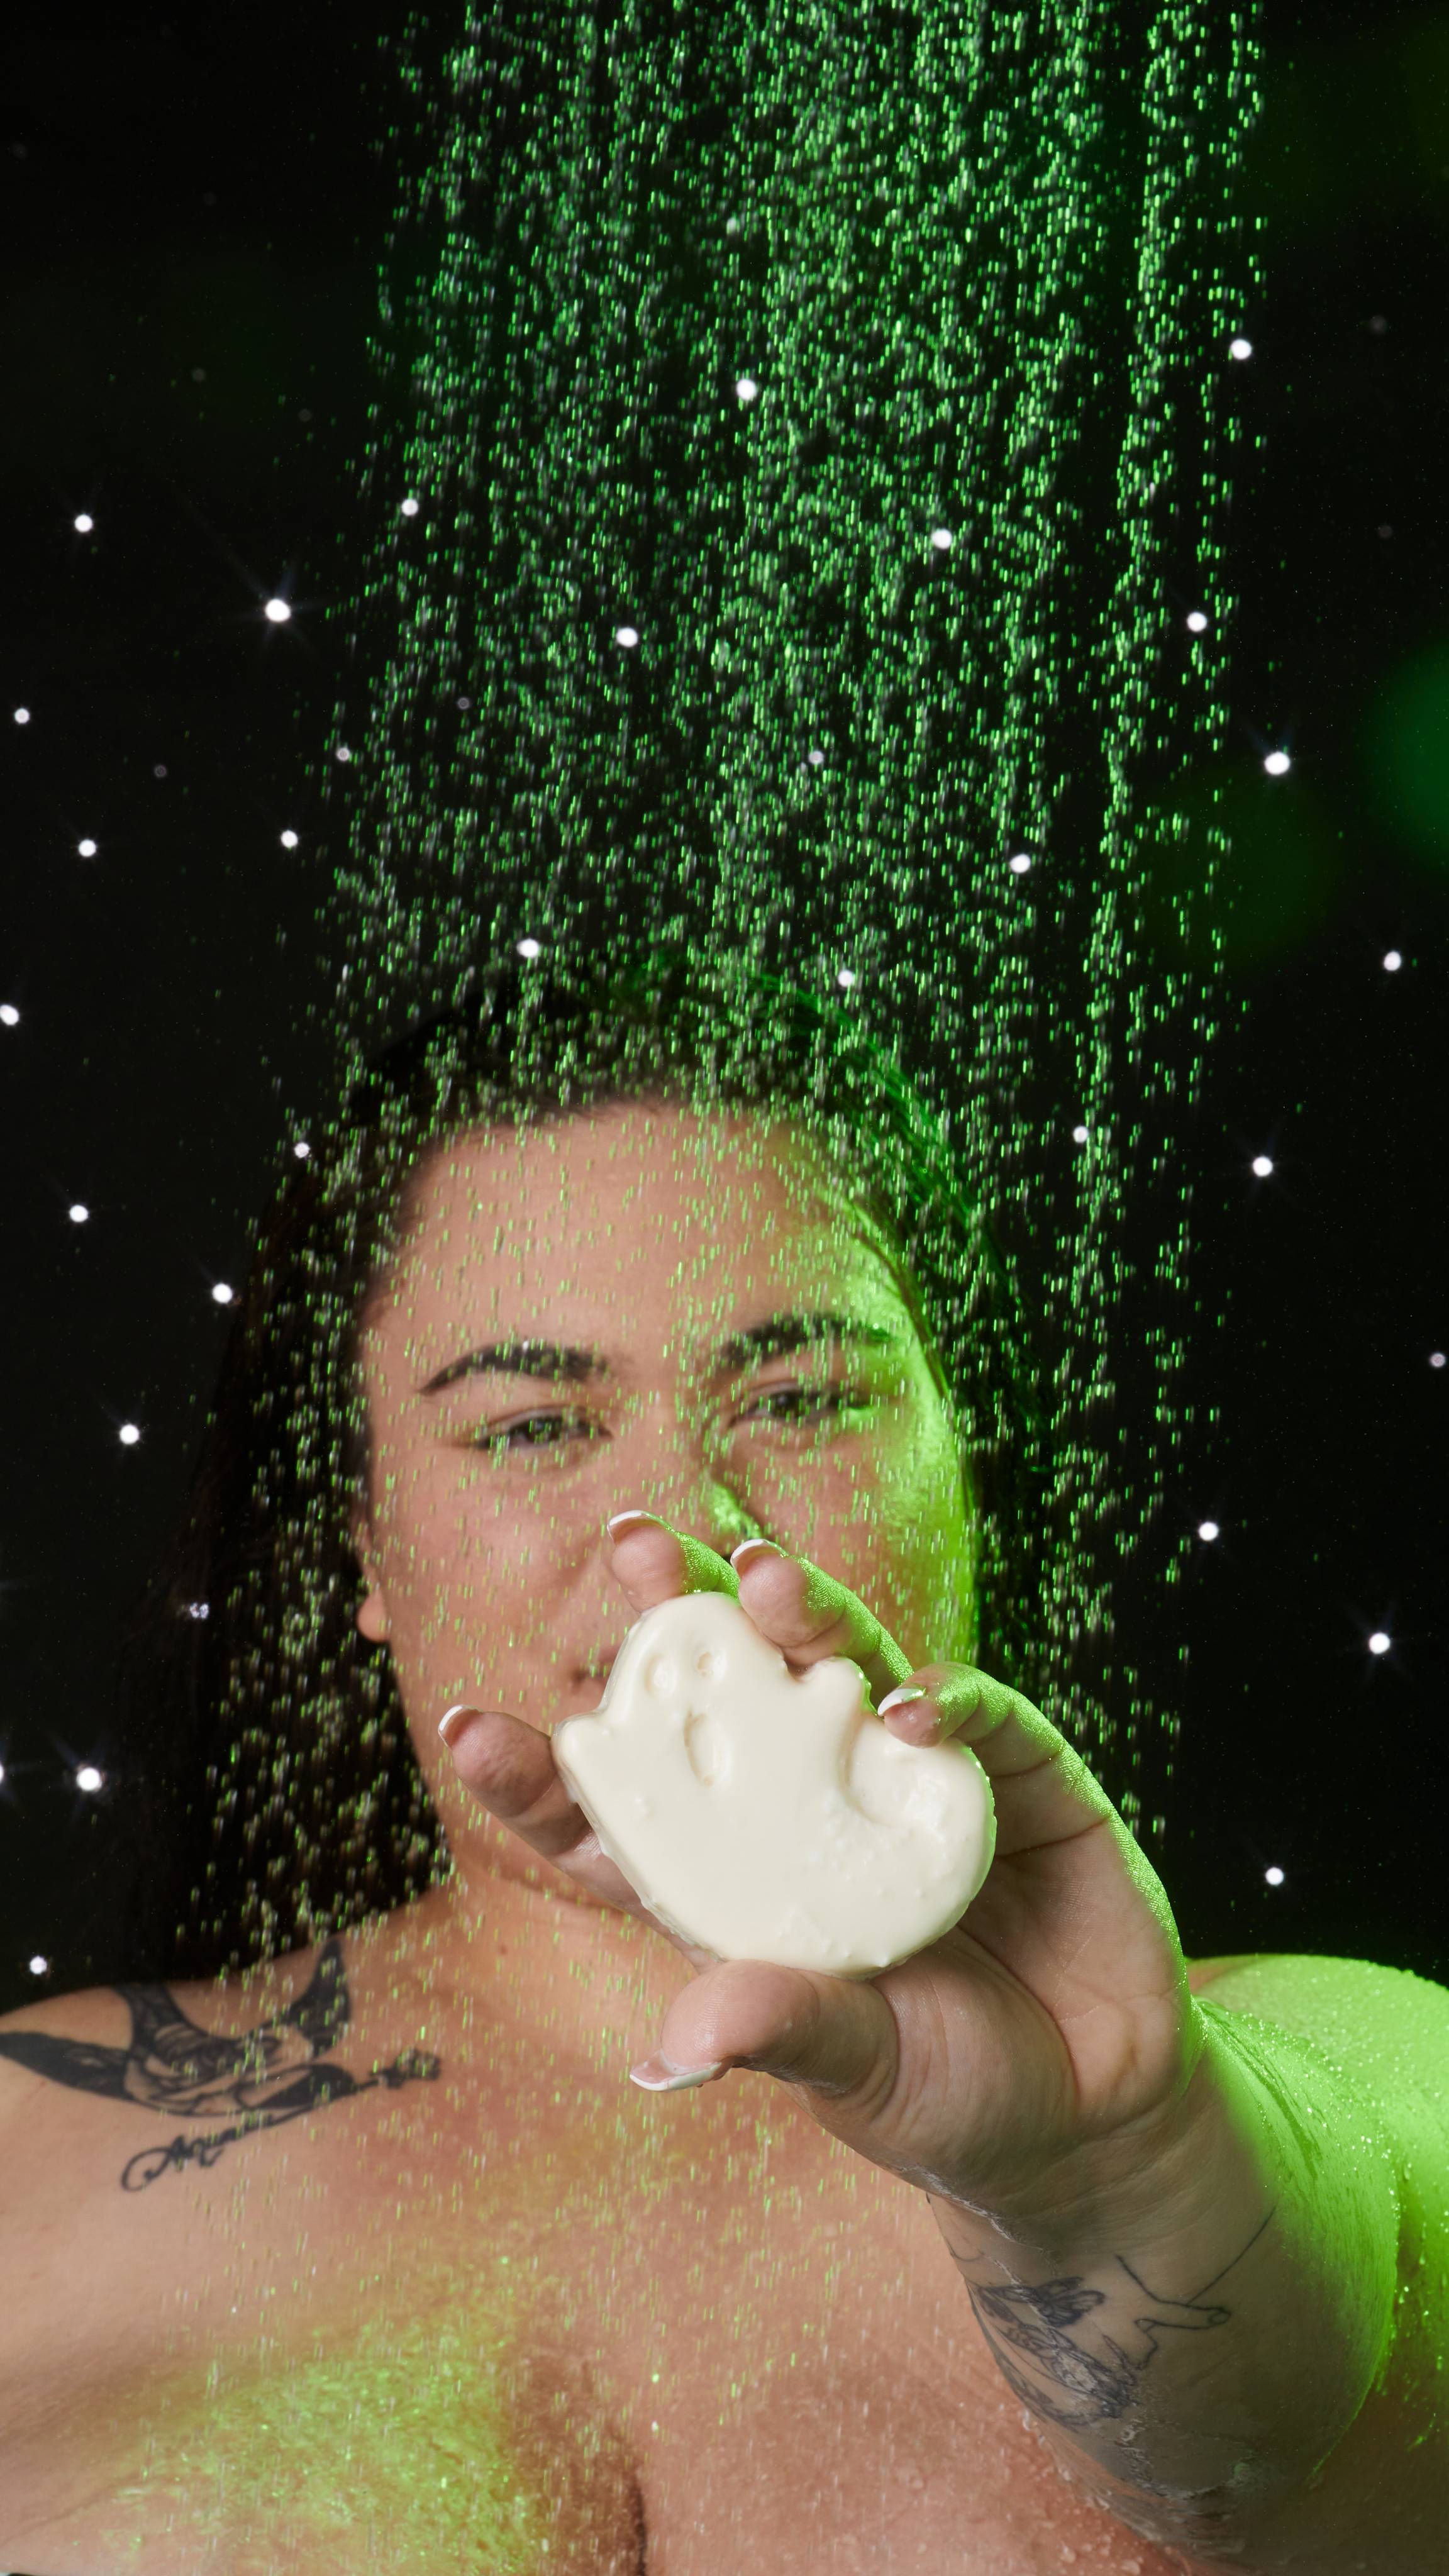 Model is stood facing the camera holding the soap in an outstretched arm focusing on the soapy ghoul.